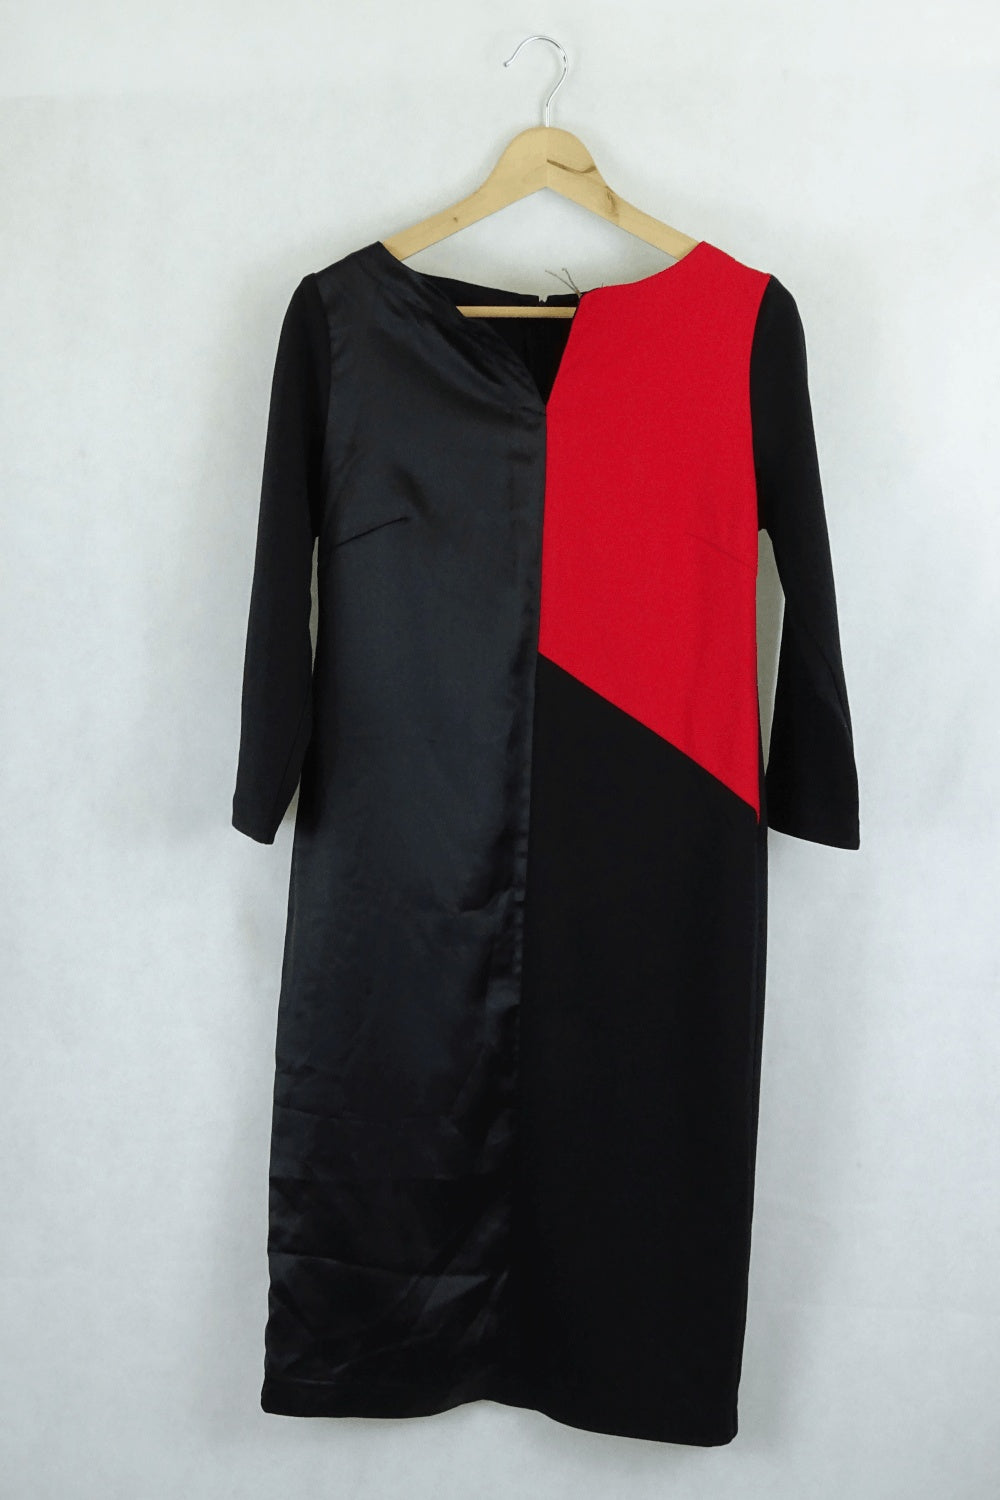 Costume National Red And Black Dress 42 (Au 10)